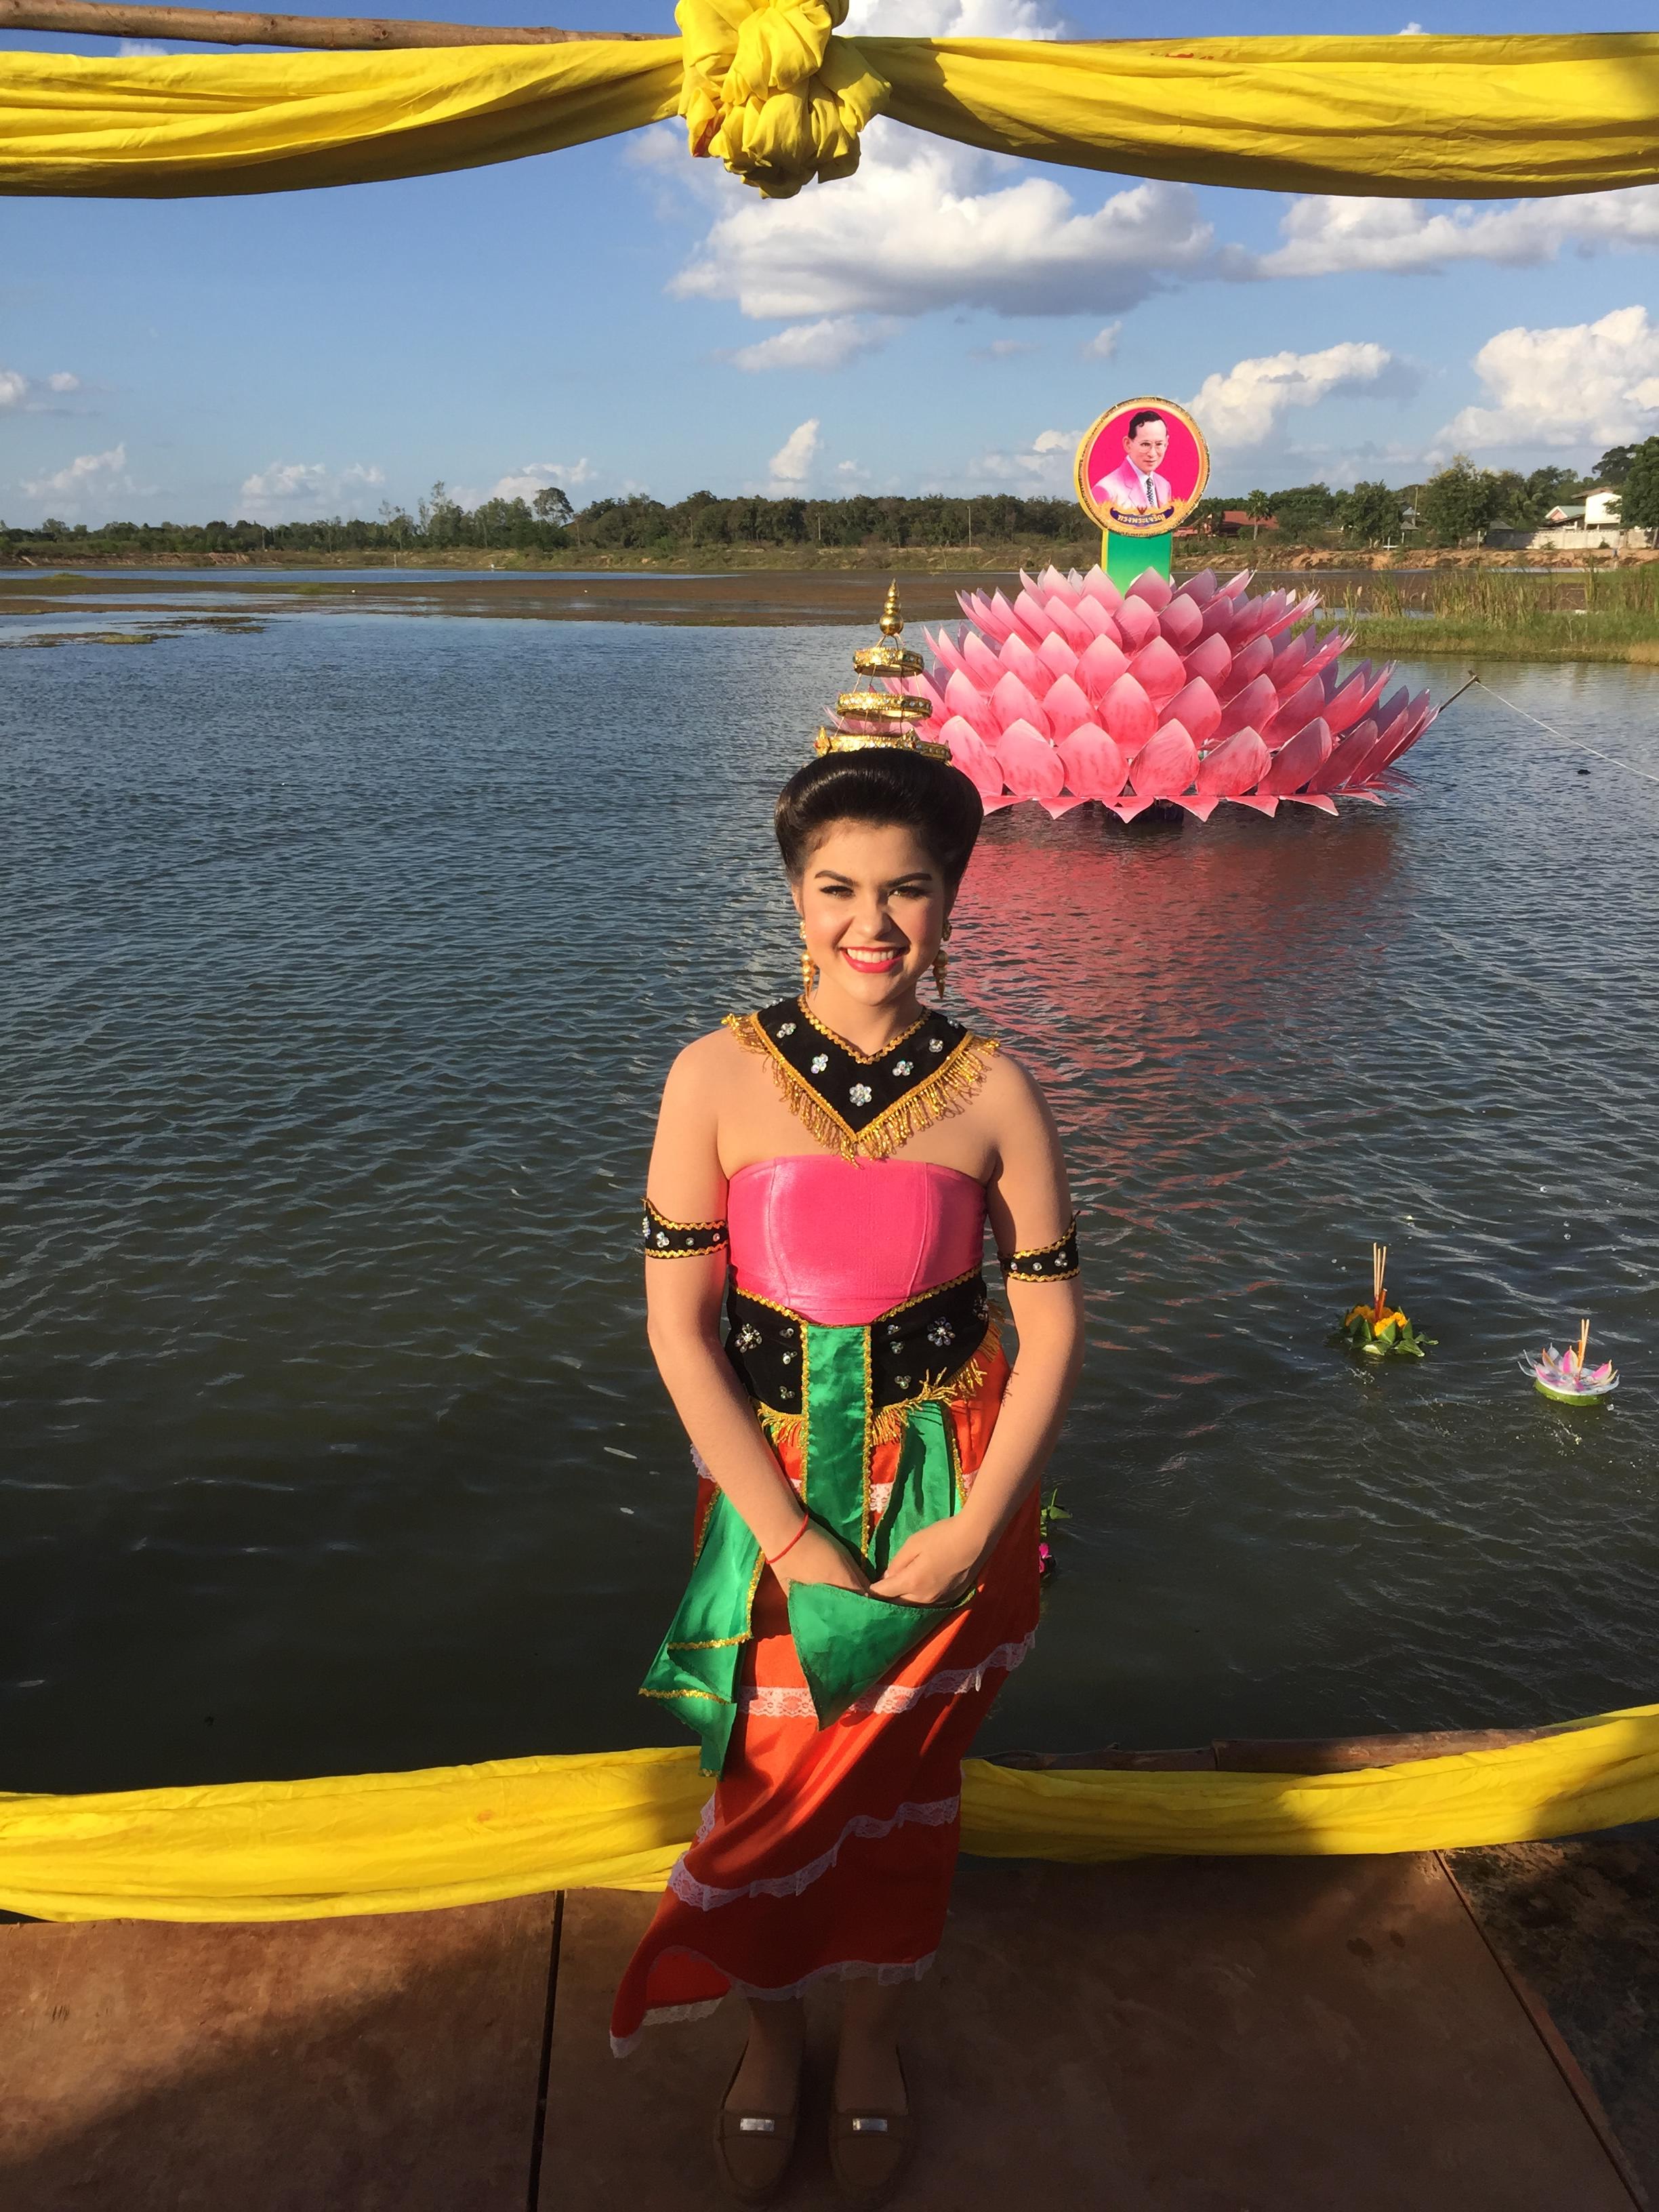 A woman in traditional Thai dress poses in front of a float on a lake.